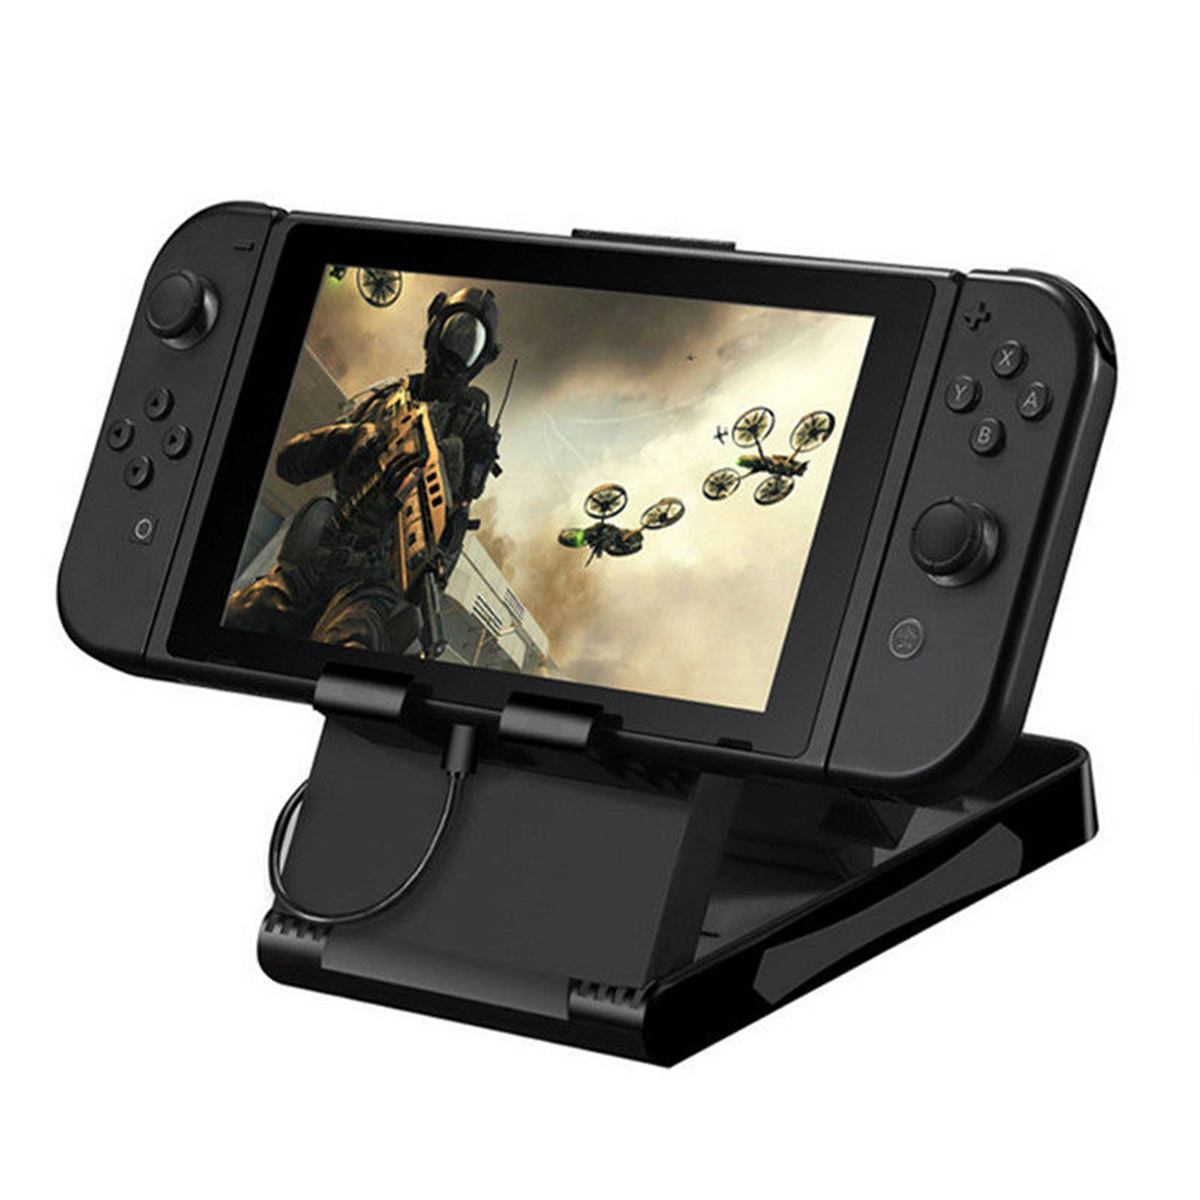 Bracket Stand Holder Mount Display Dock for Nintendo Switch Game Console 10